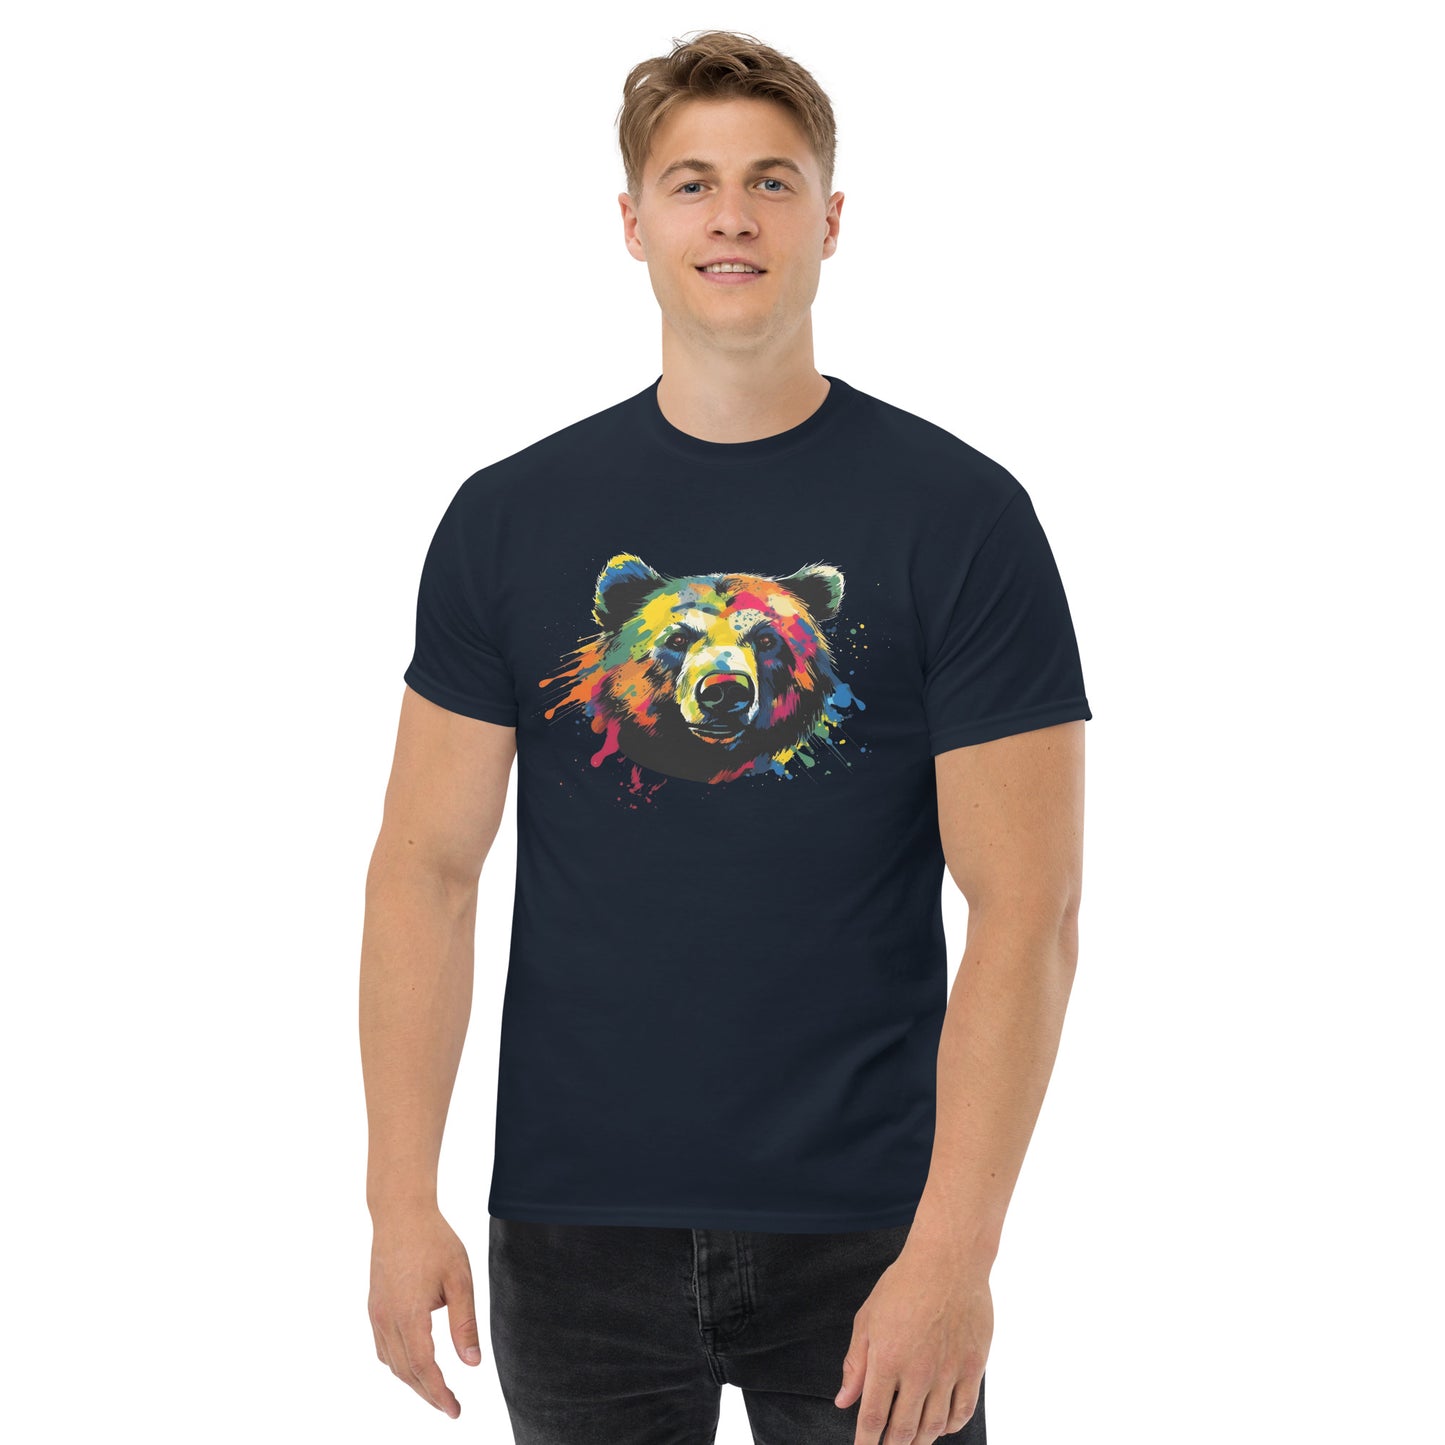 Grizzly Bear Pride men's classic tee